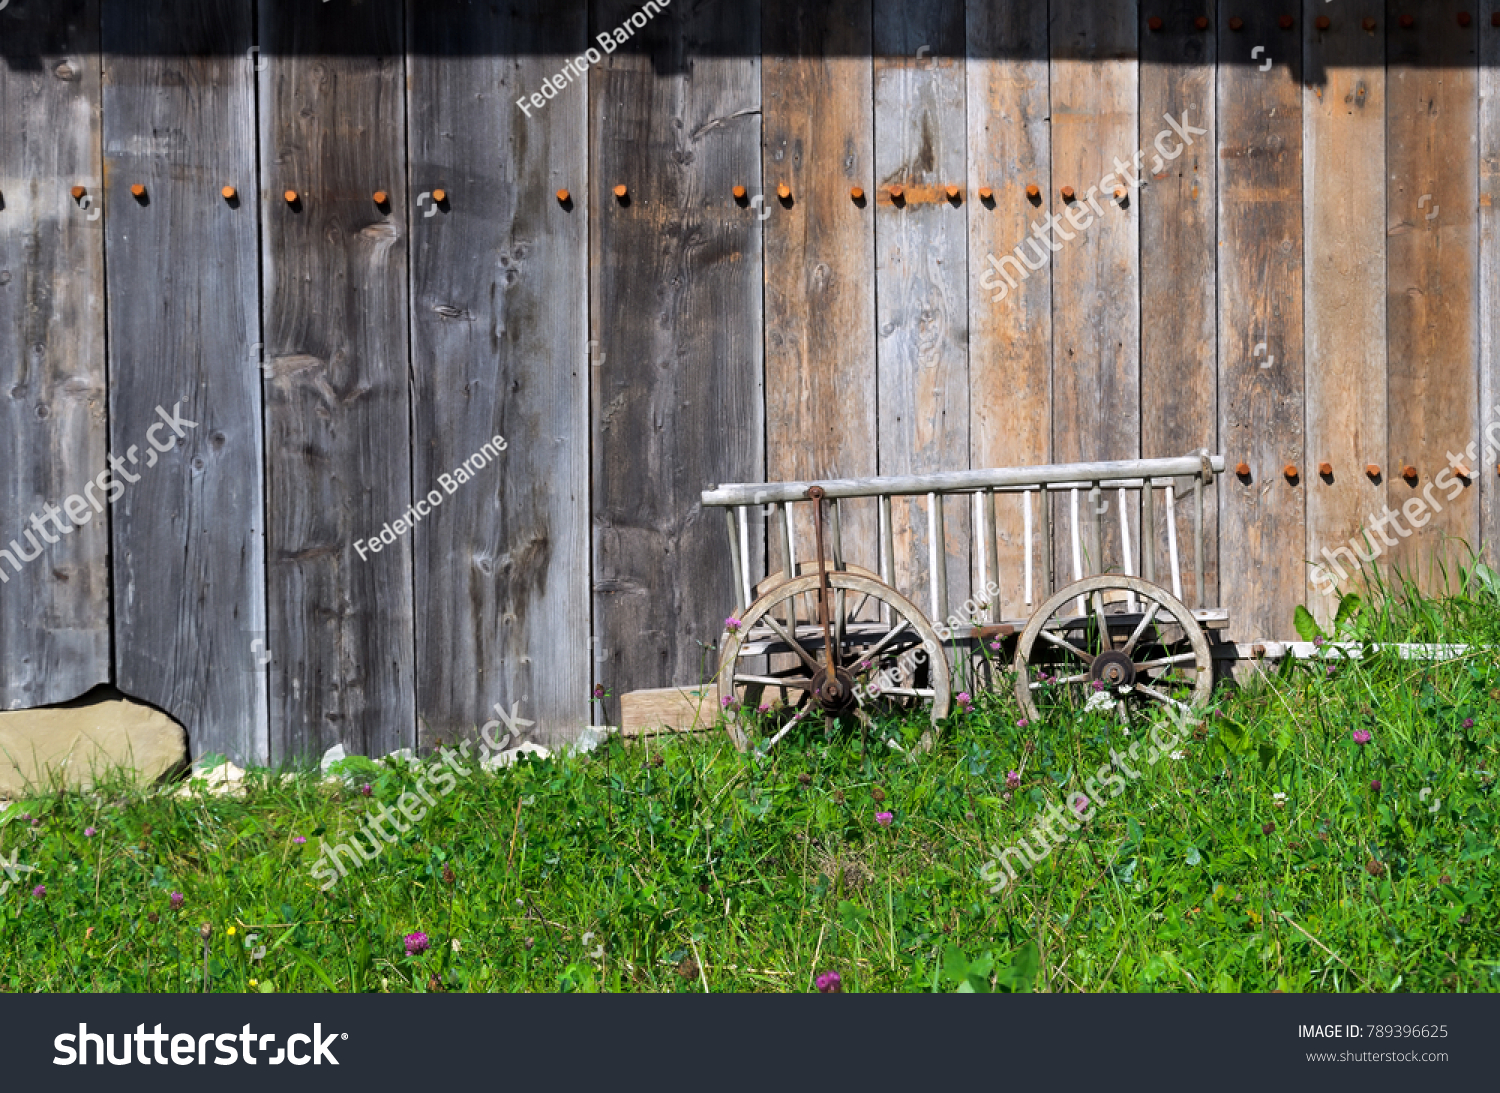 stock-photo-old-wooden-small-cart-side-b